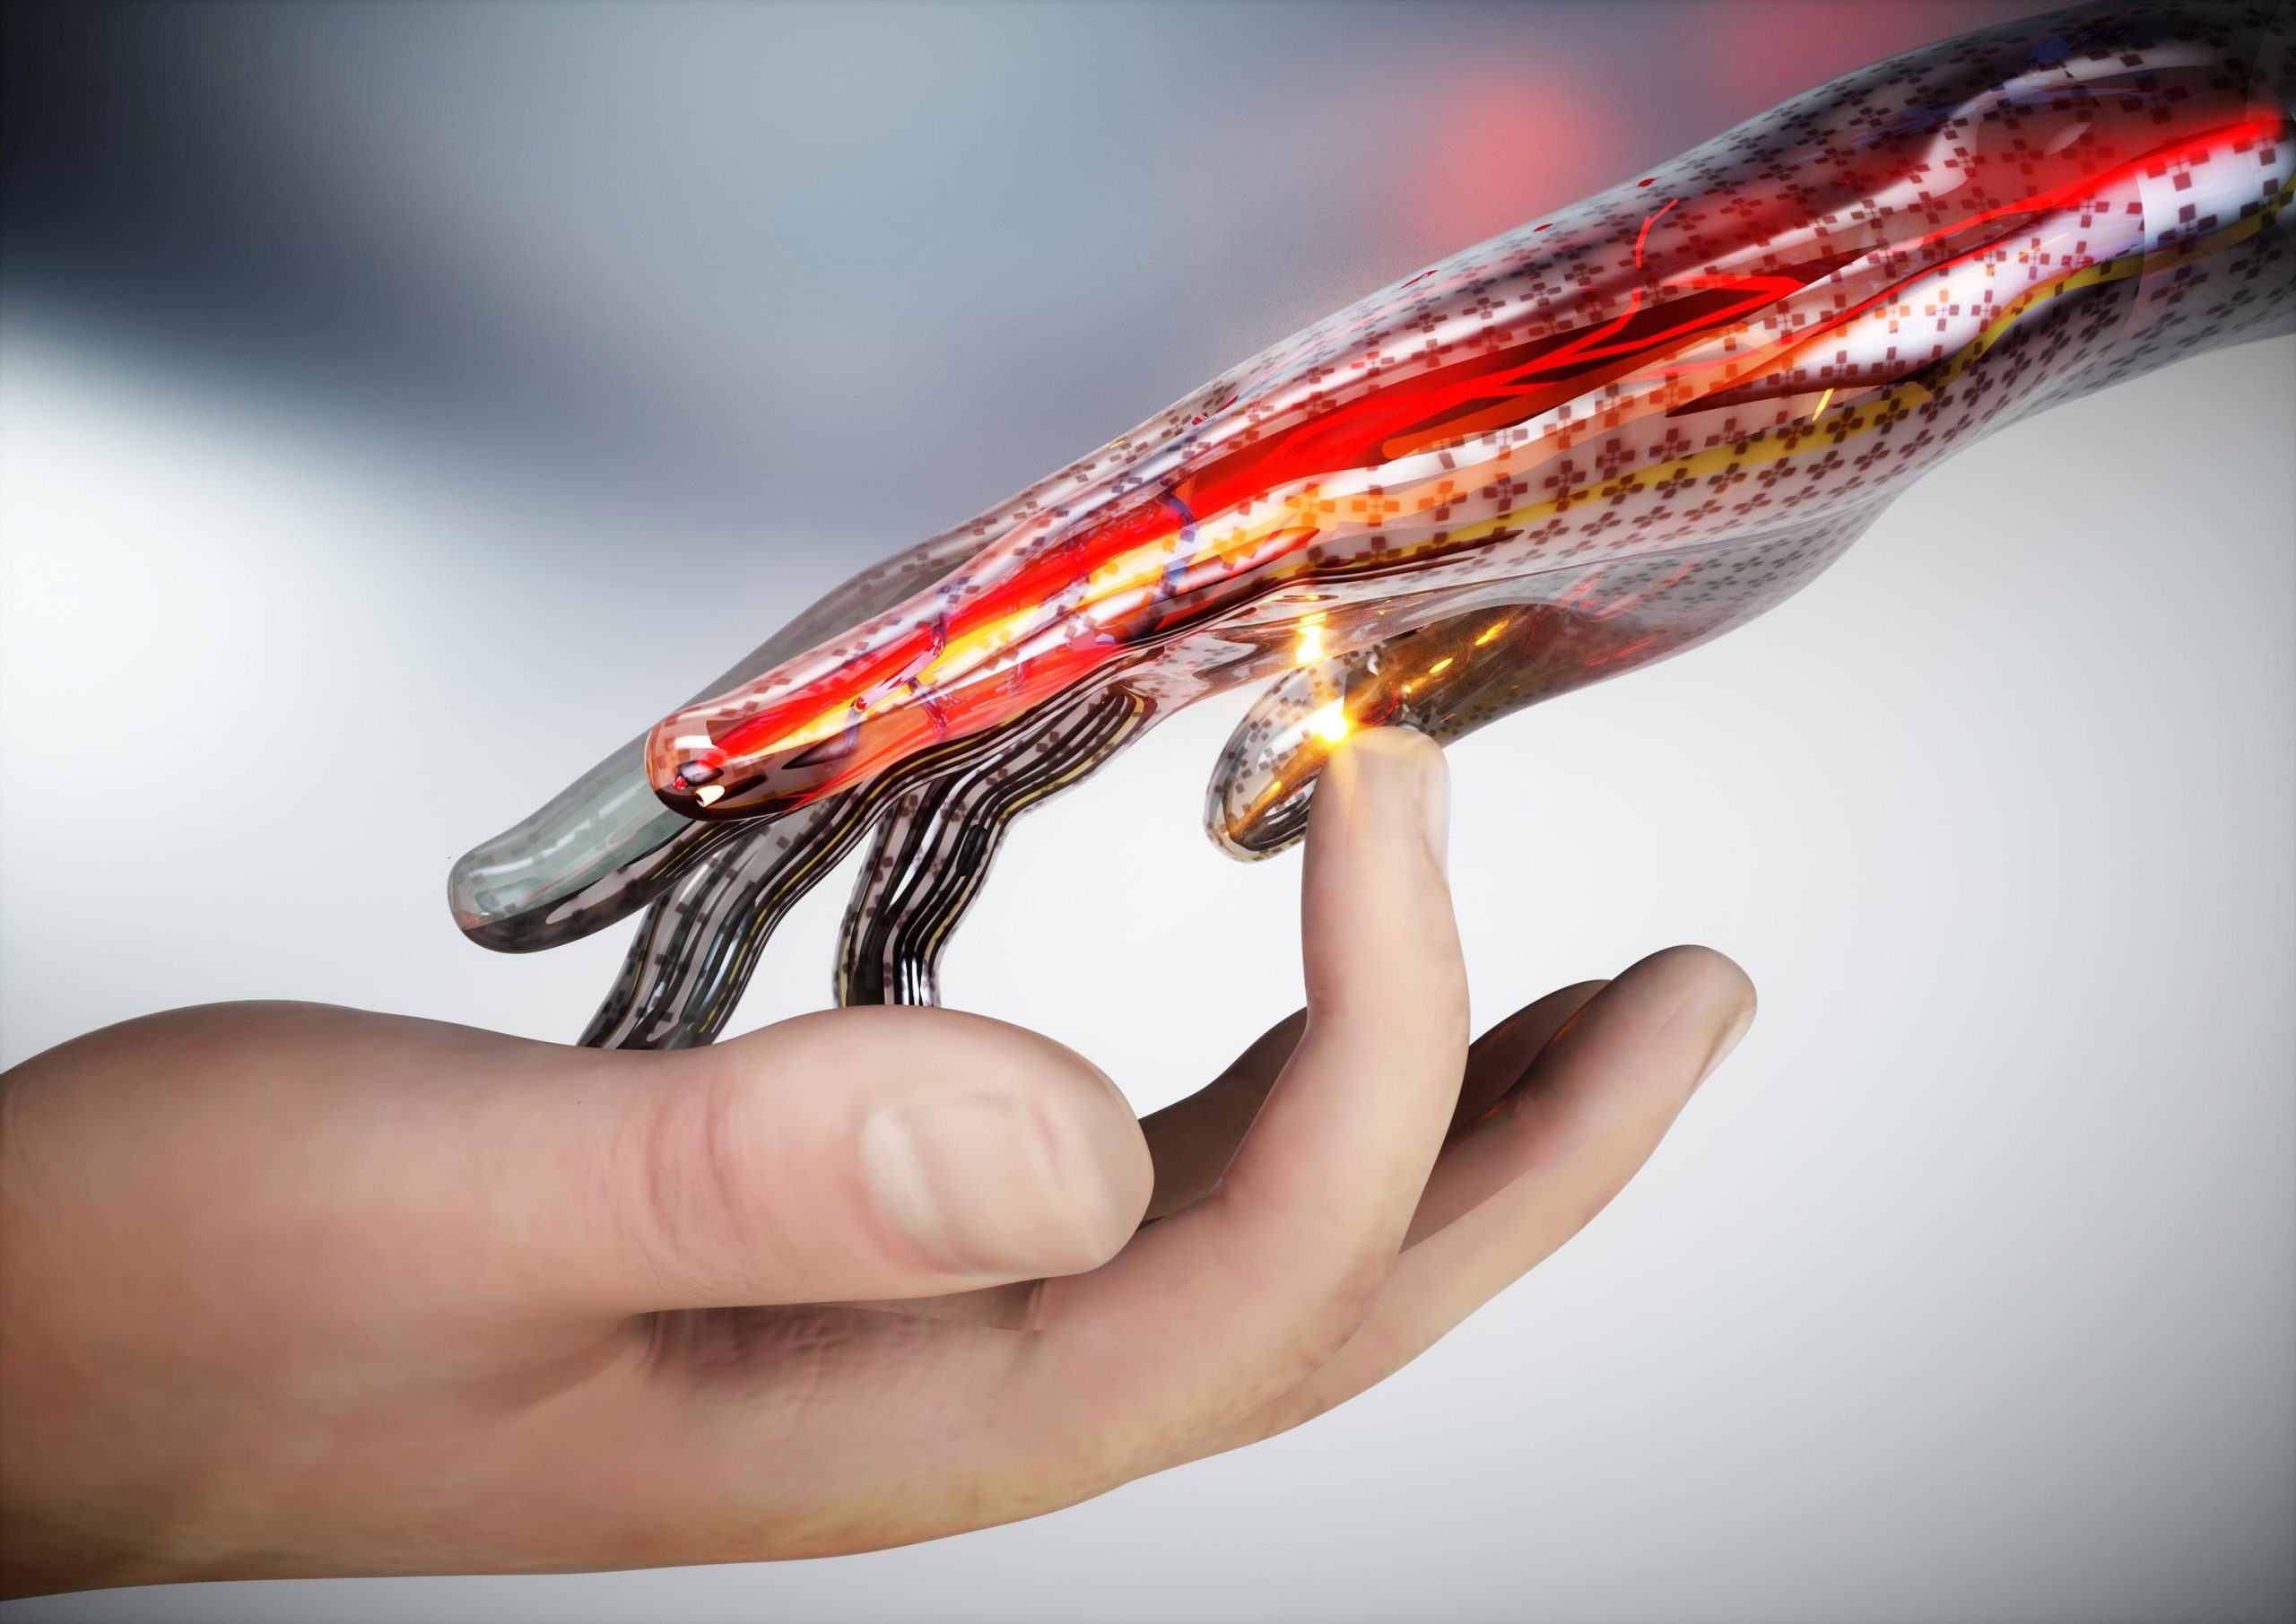 Electronic Skin may bring Sensitivity to Prosthetics and Robots